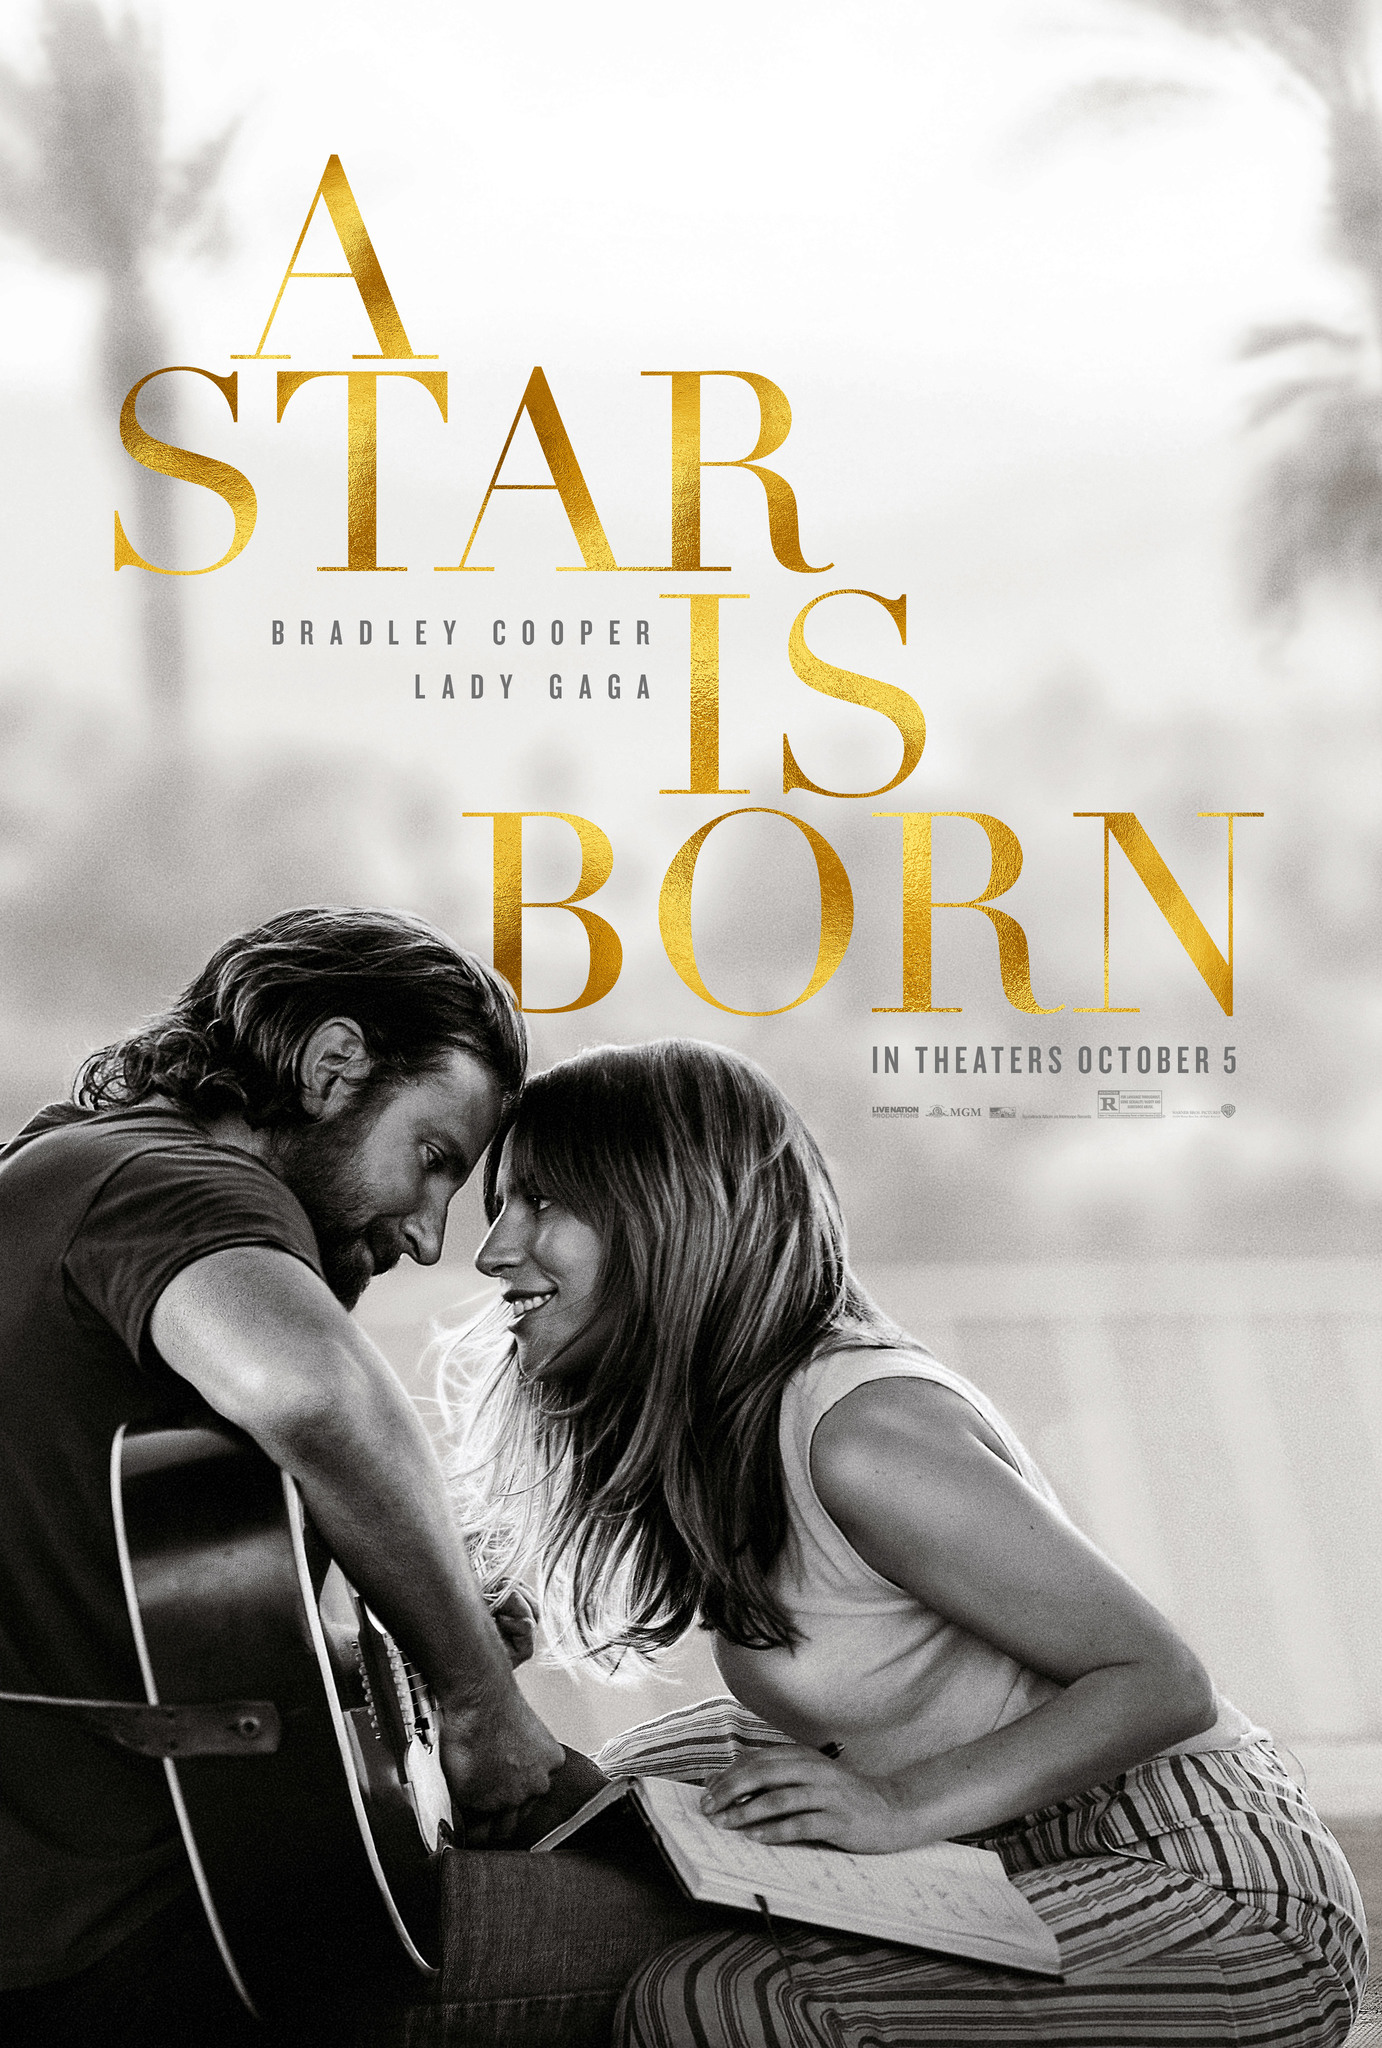 The A Star Is Born poster